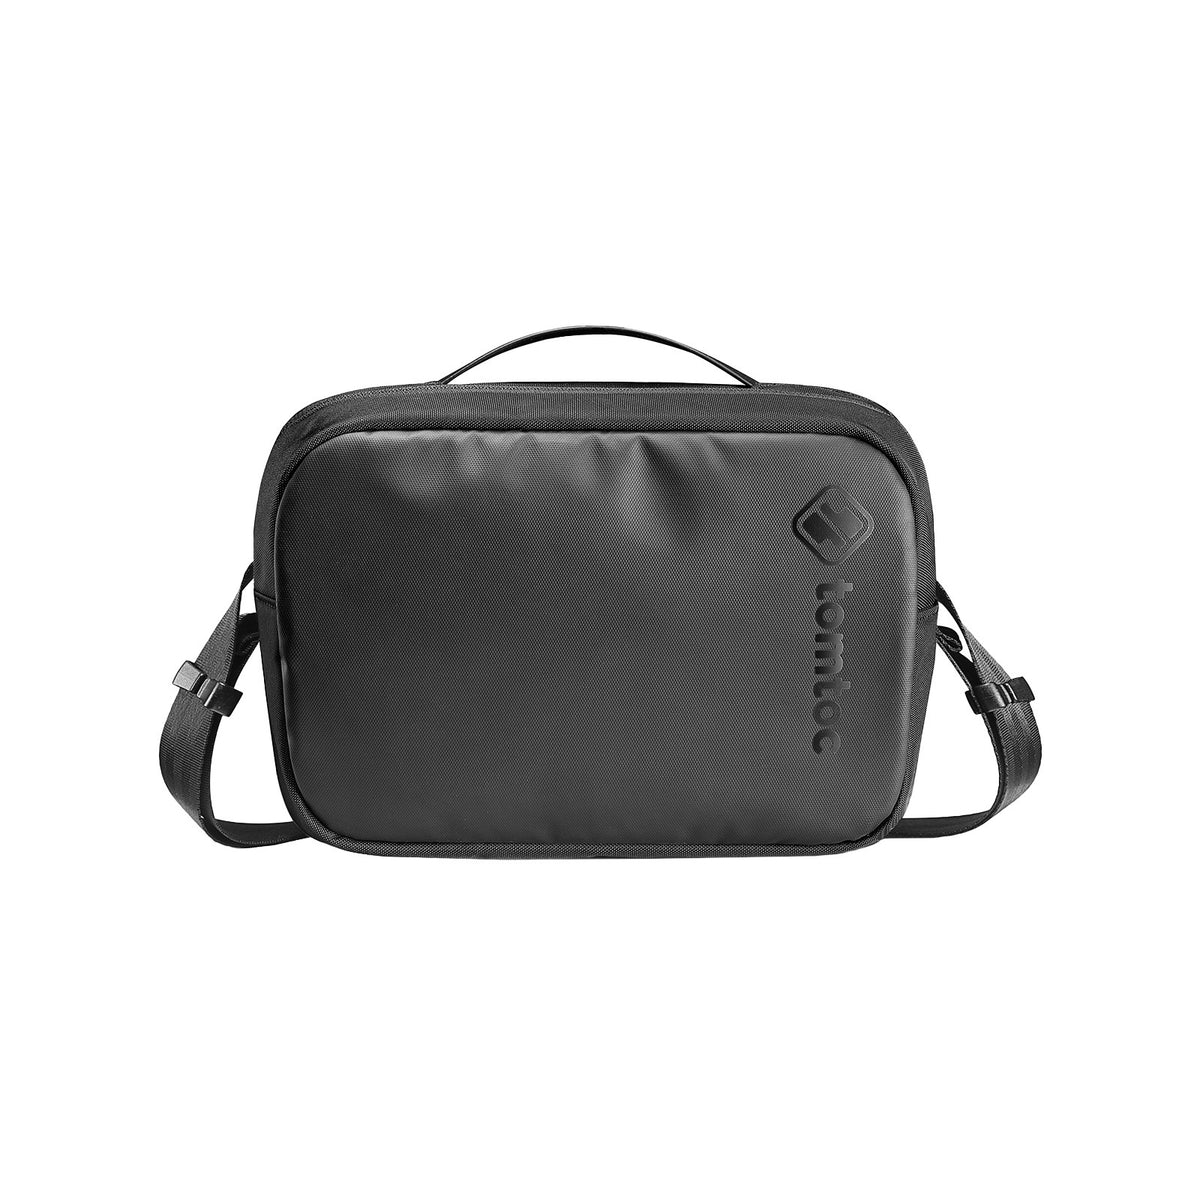 primary_UrbanEX-T20 Shoulder Bag for iPad Air 10.9-inch /iPad Pro 11-inch